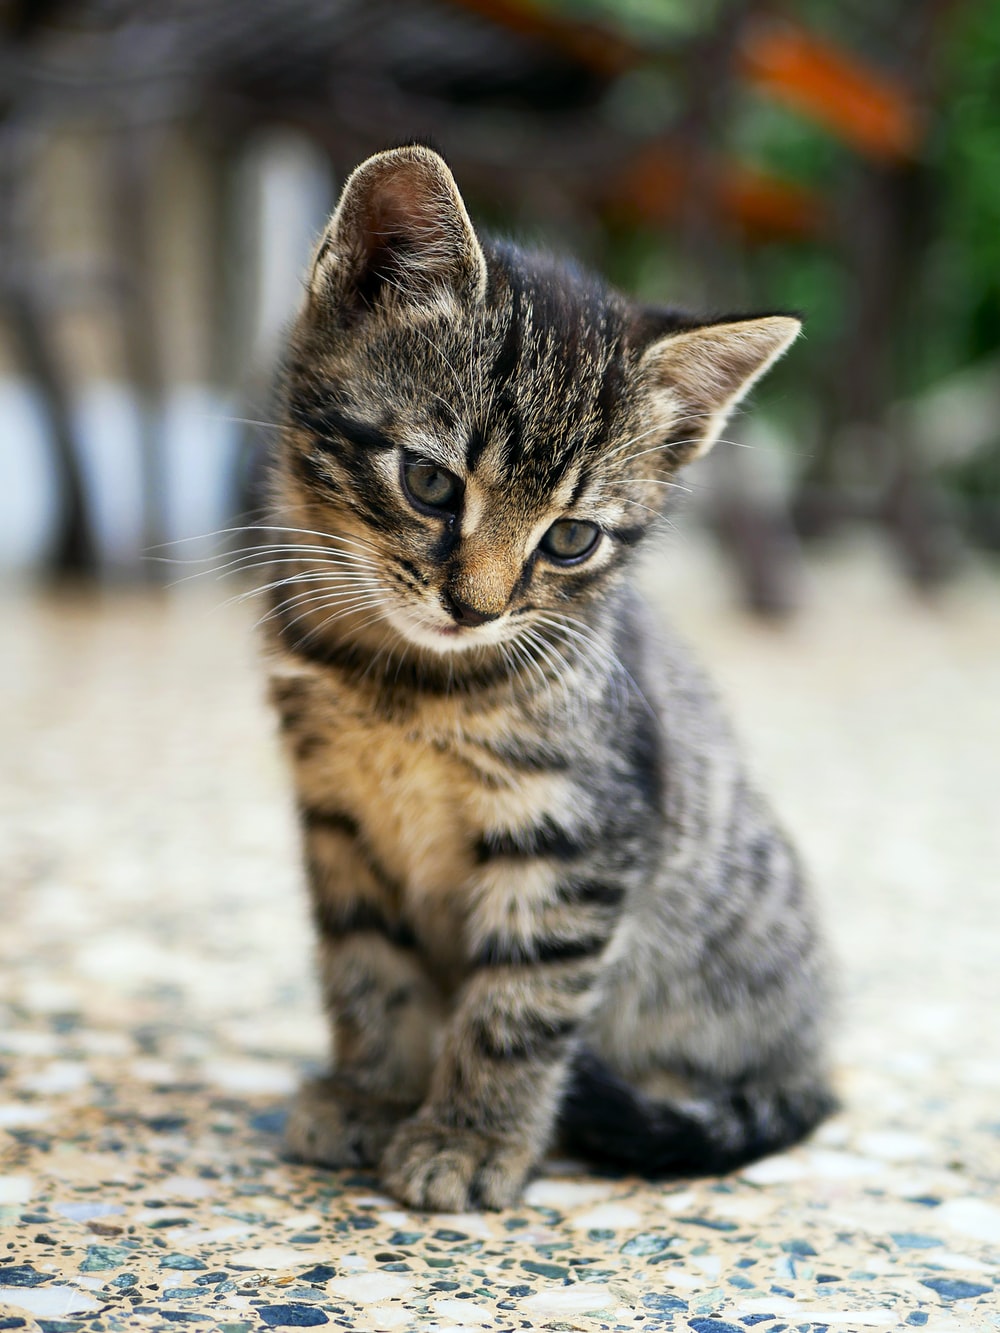 Baby Cat Picture. Download Free Image